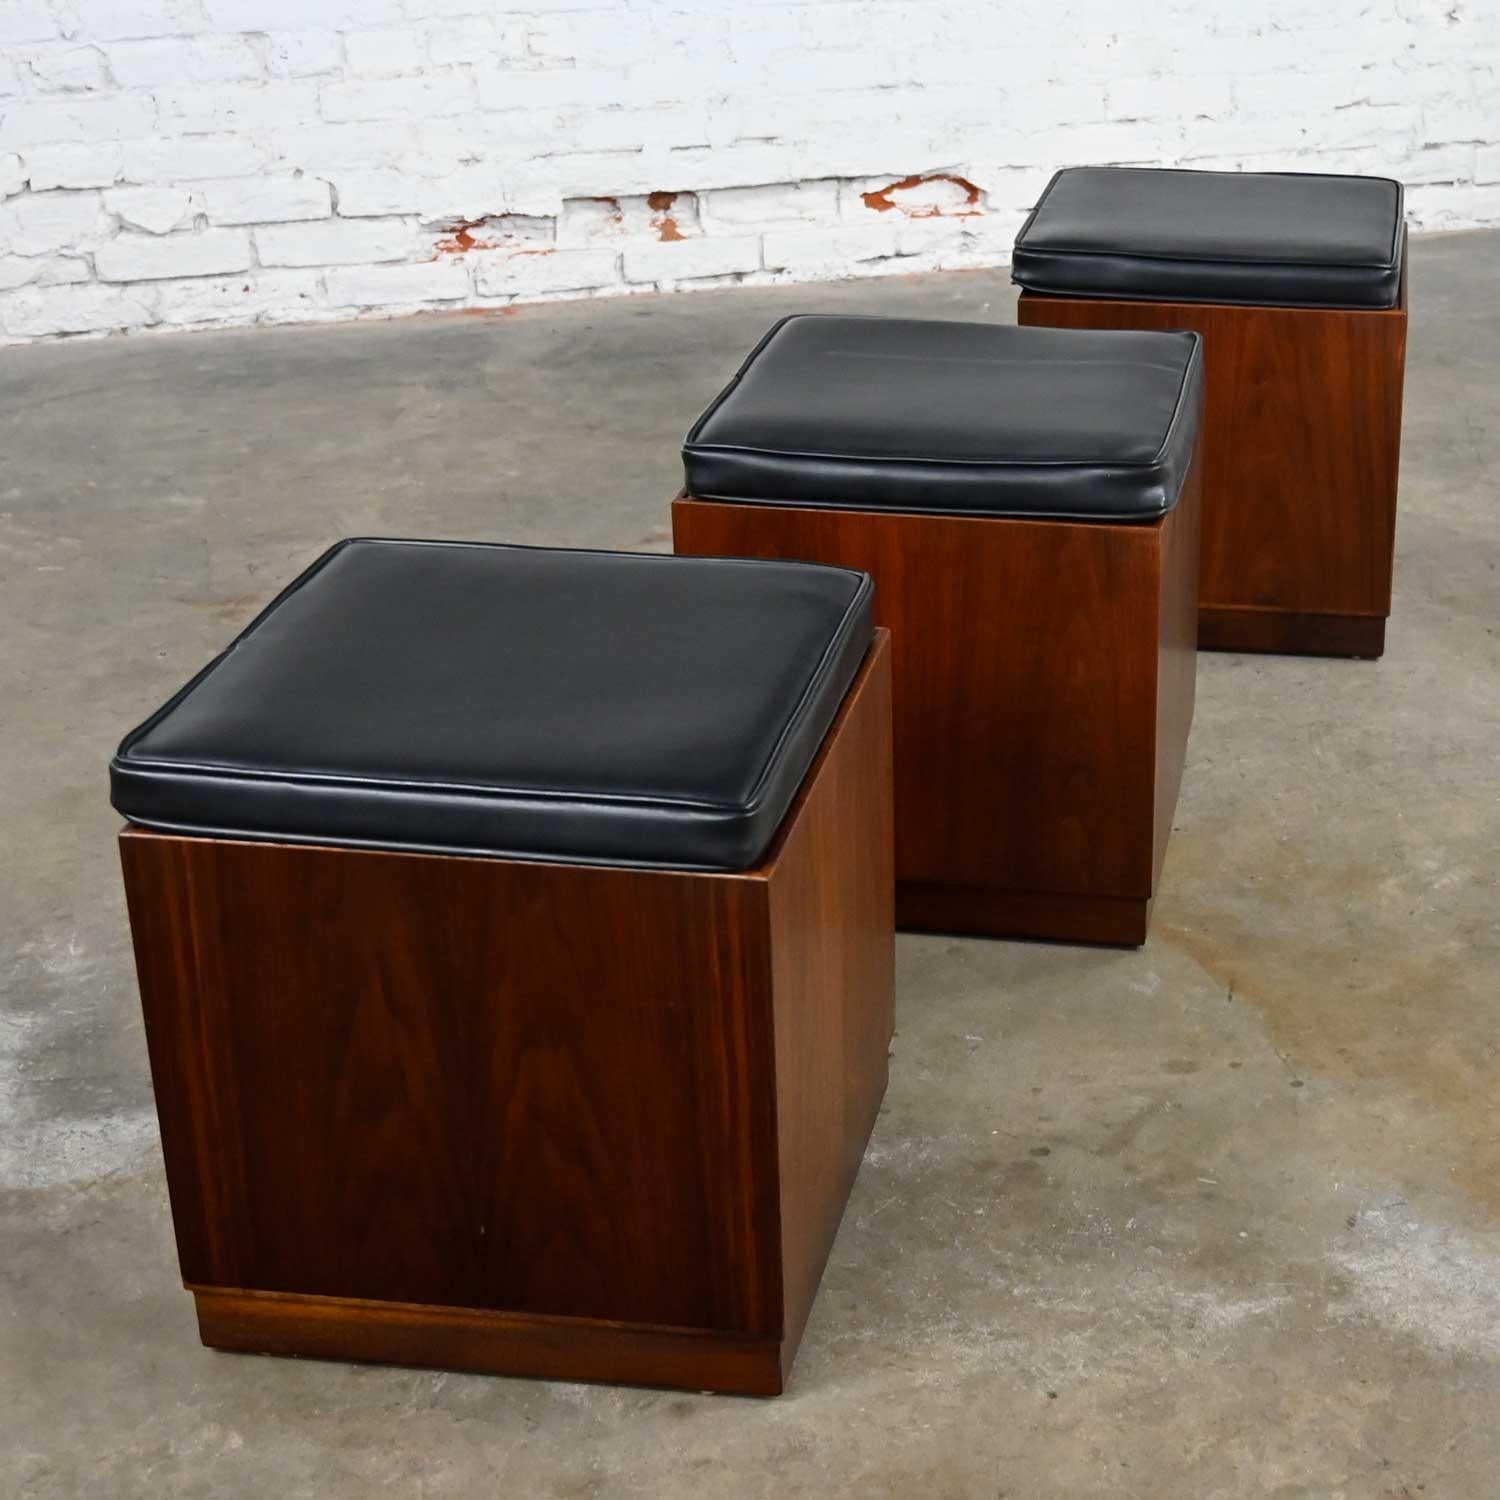 Amazing Mid-Century Modern trio of square walnut cube stools number 42102-01 with black faux leather upholstered tops by Jack Cartwright for Founders Furniture’s Patterns 7 line. Beautiful condition, keeping in mind that these are vintage and not